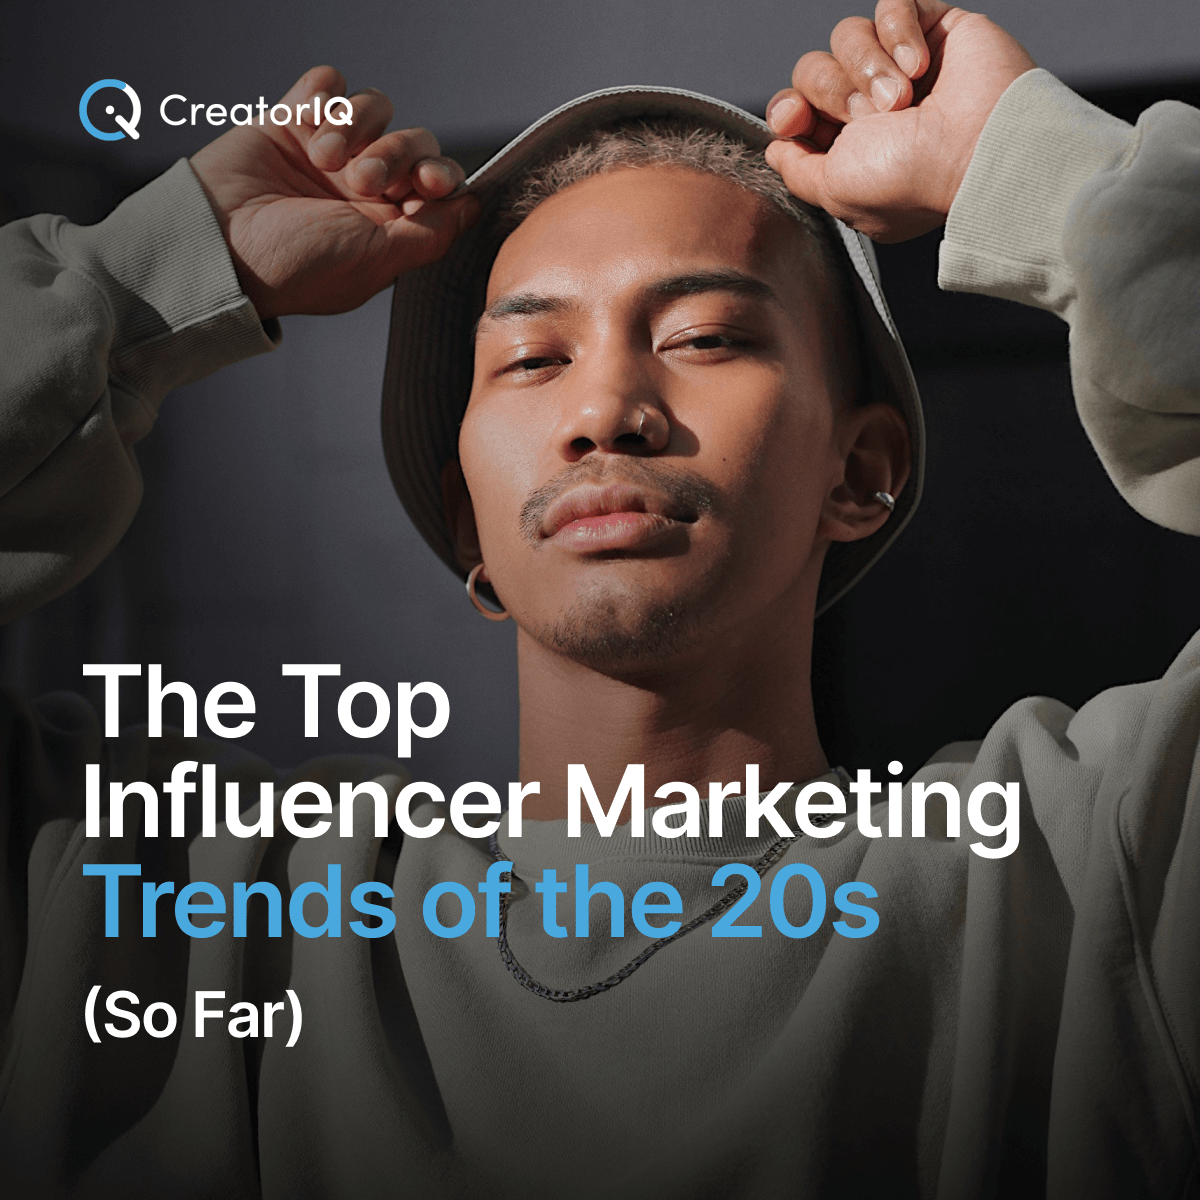 The Top Influencer Marketing Trends of the 20s (So Far)